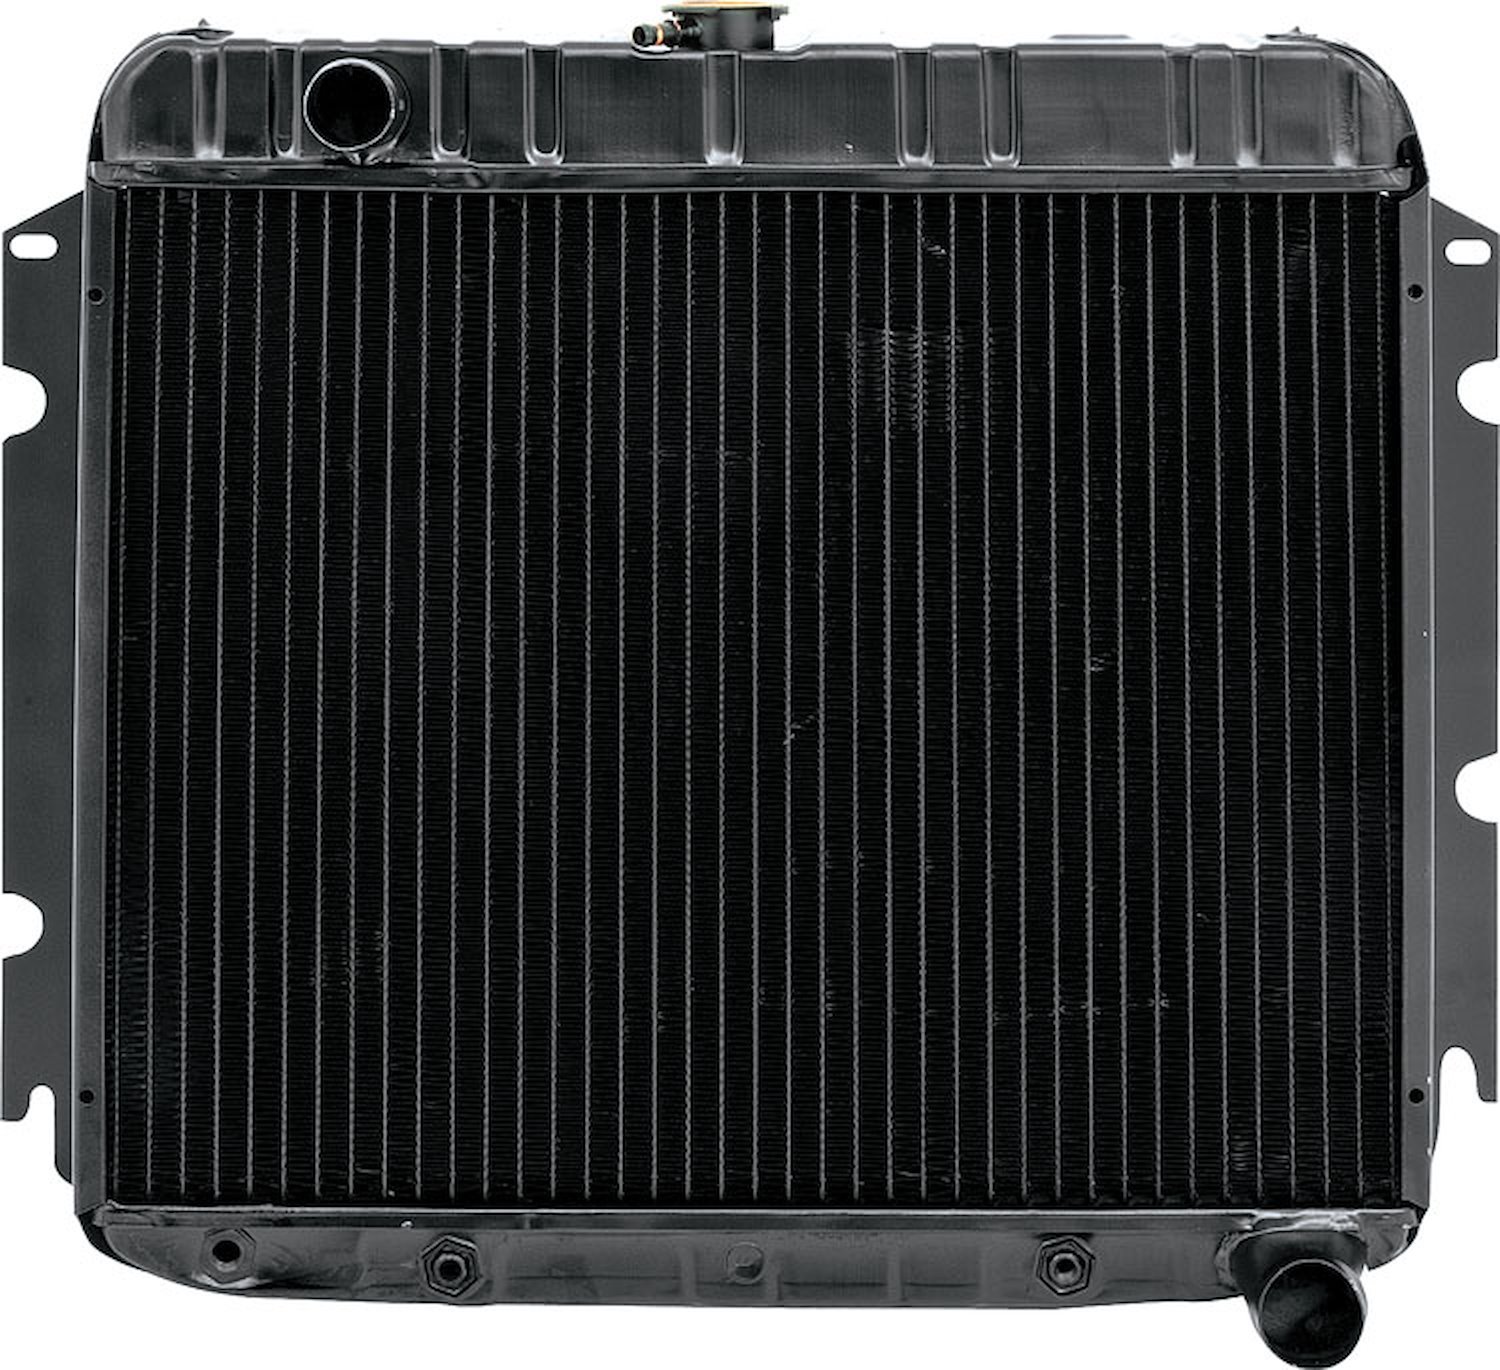 MA2249A Radiator 1970-72 Mopar A-Body Small Block V8 With Automatic Trans 3 Row Replacement